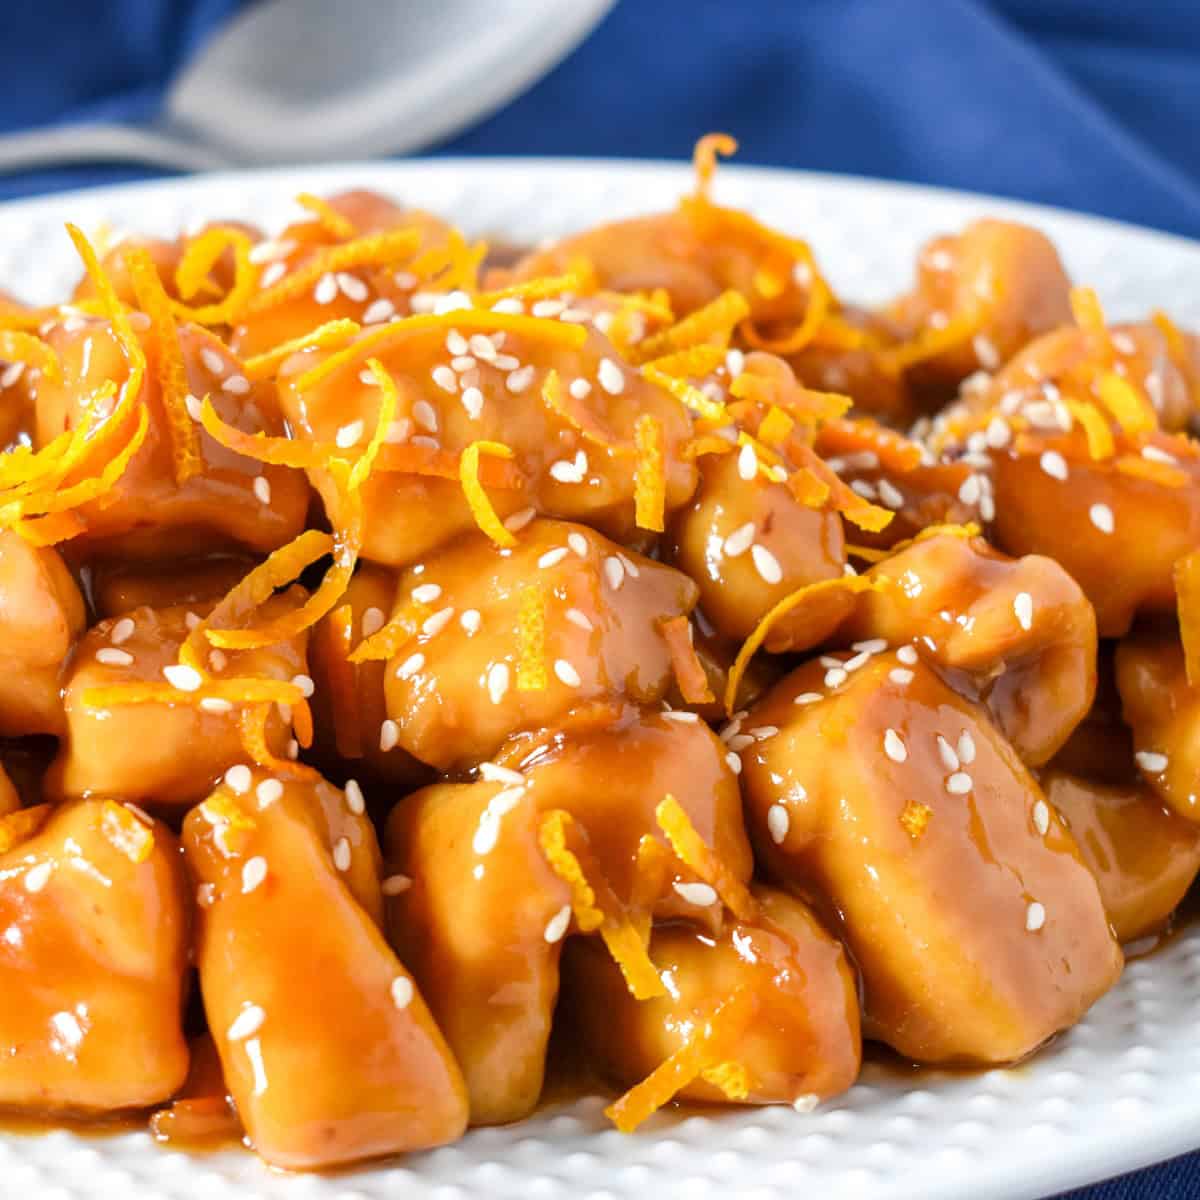 The orange chicken served on a white platter and garnished with orange zest and sesame seeds.